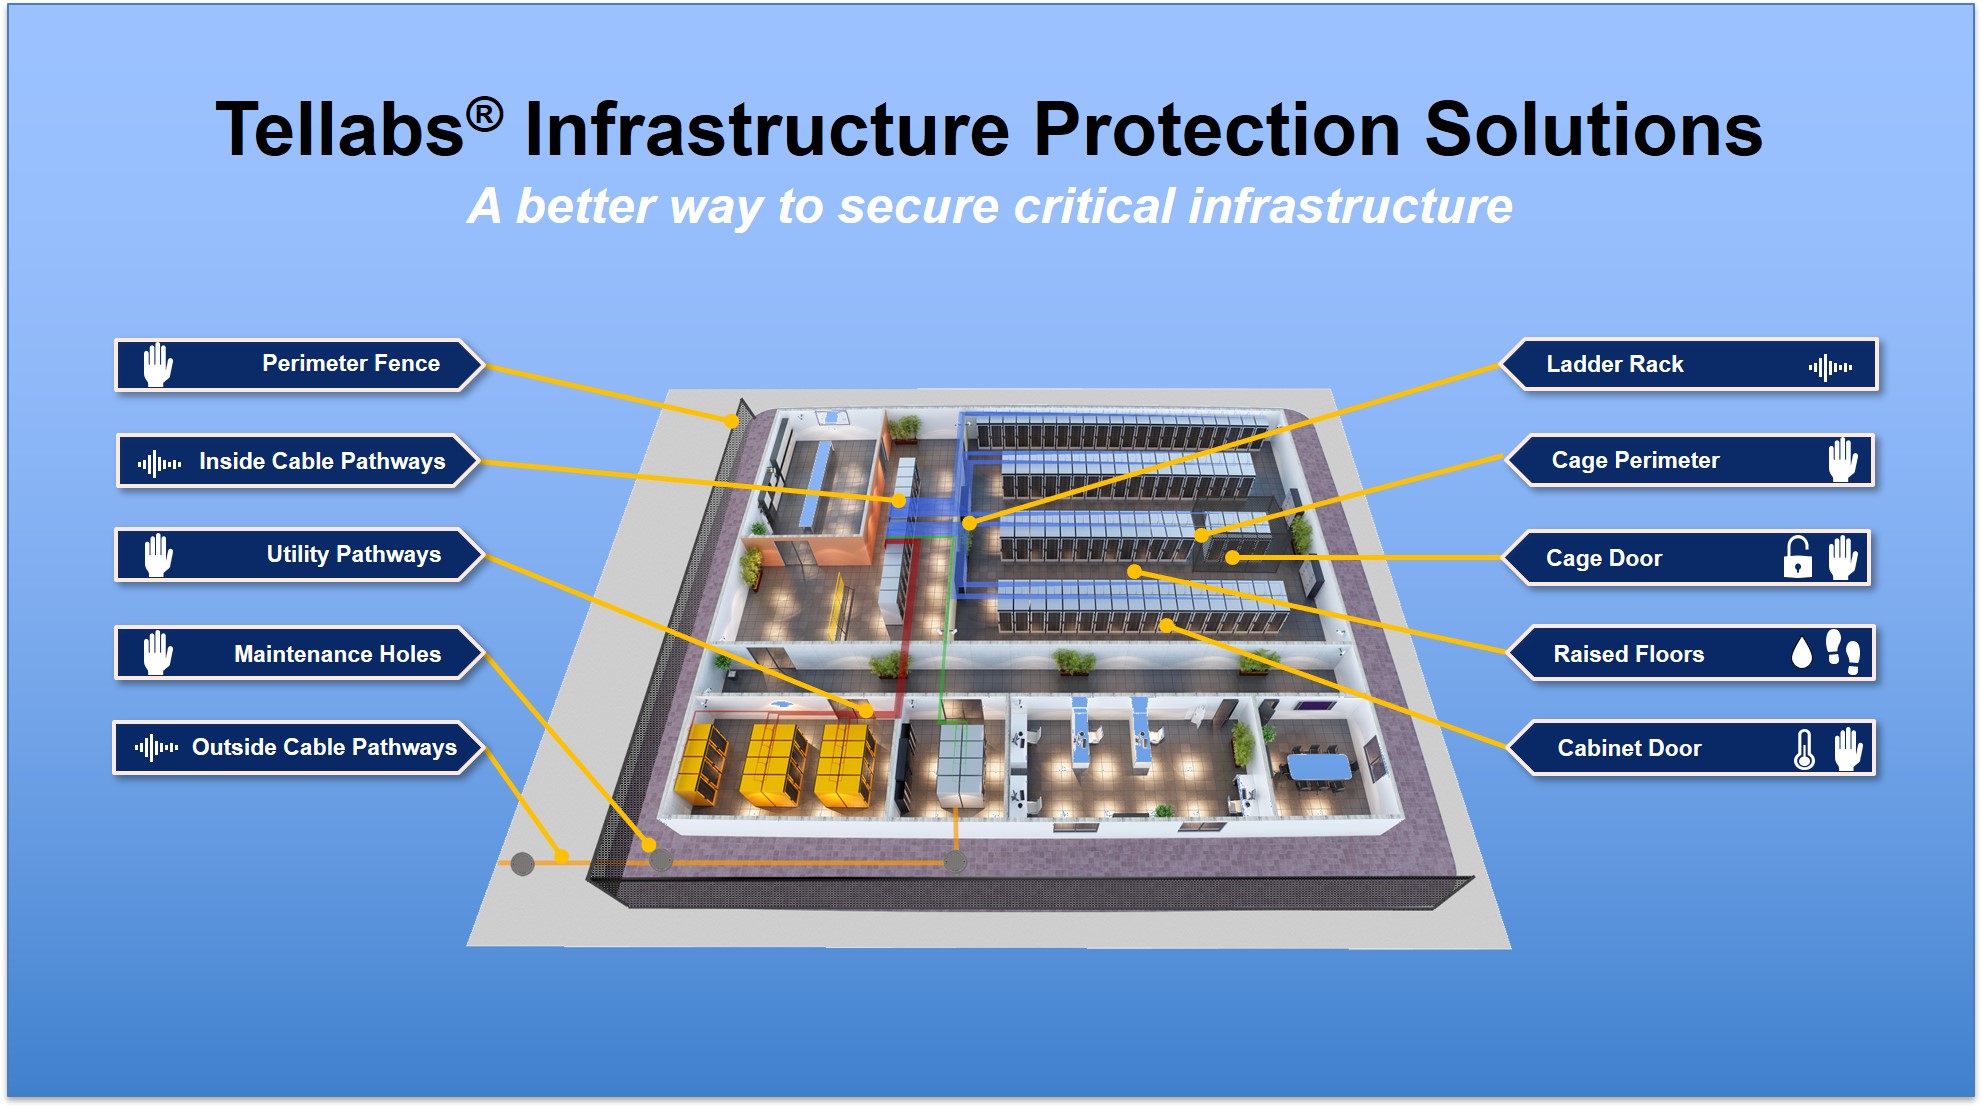 tellabs infrastructure protection solutions ips 16x9.png